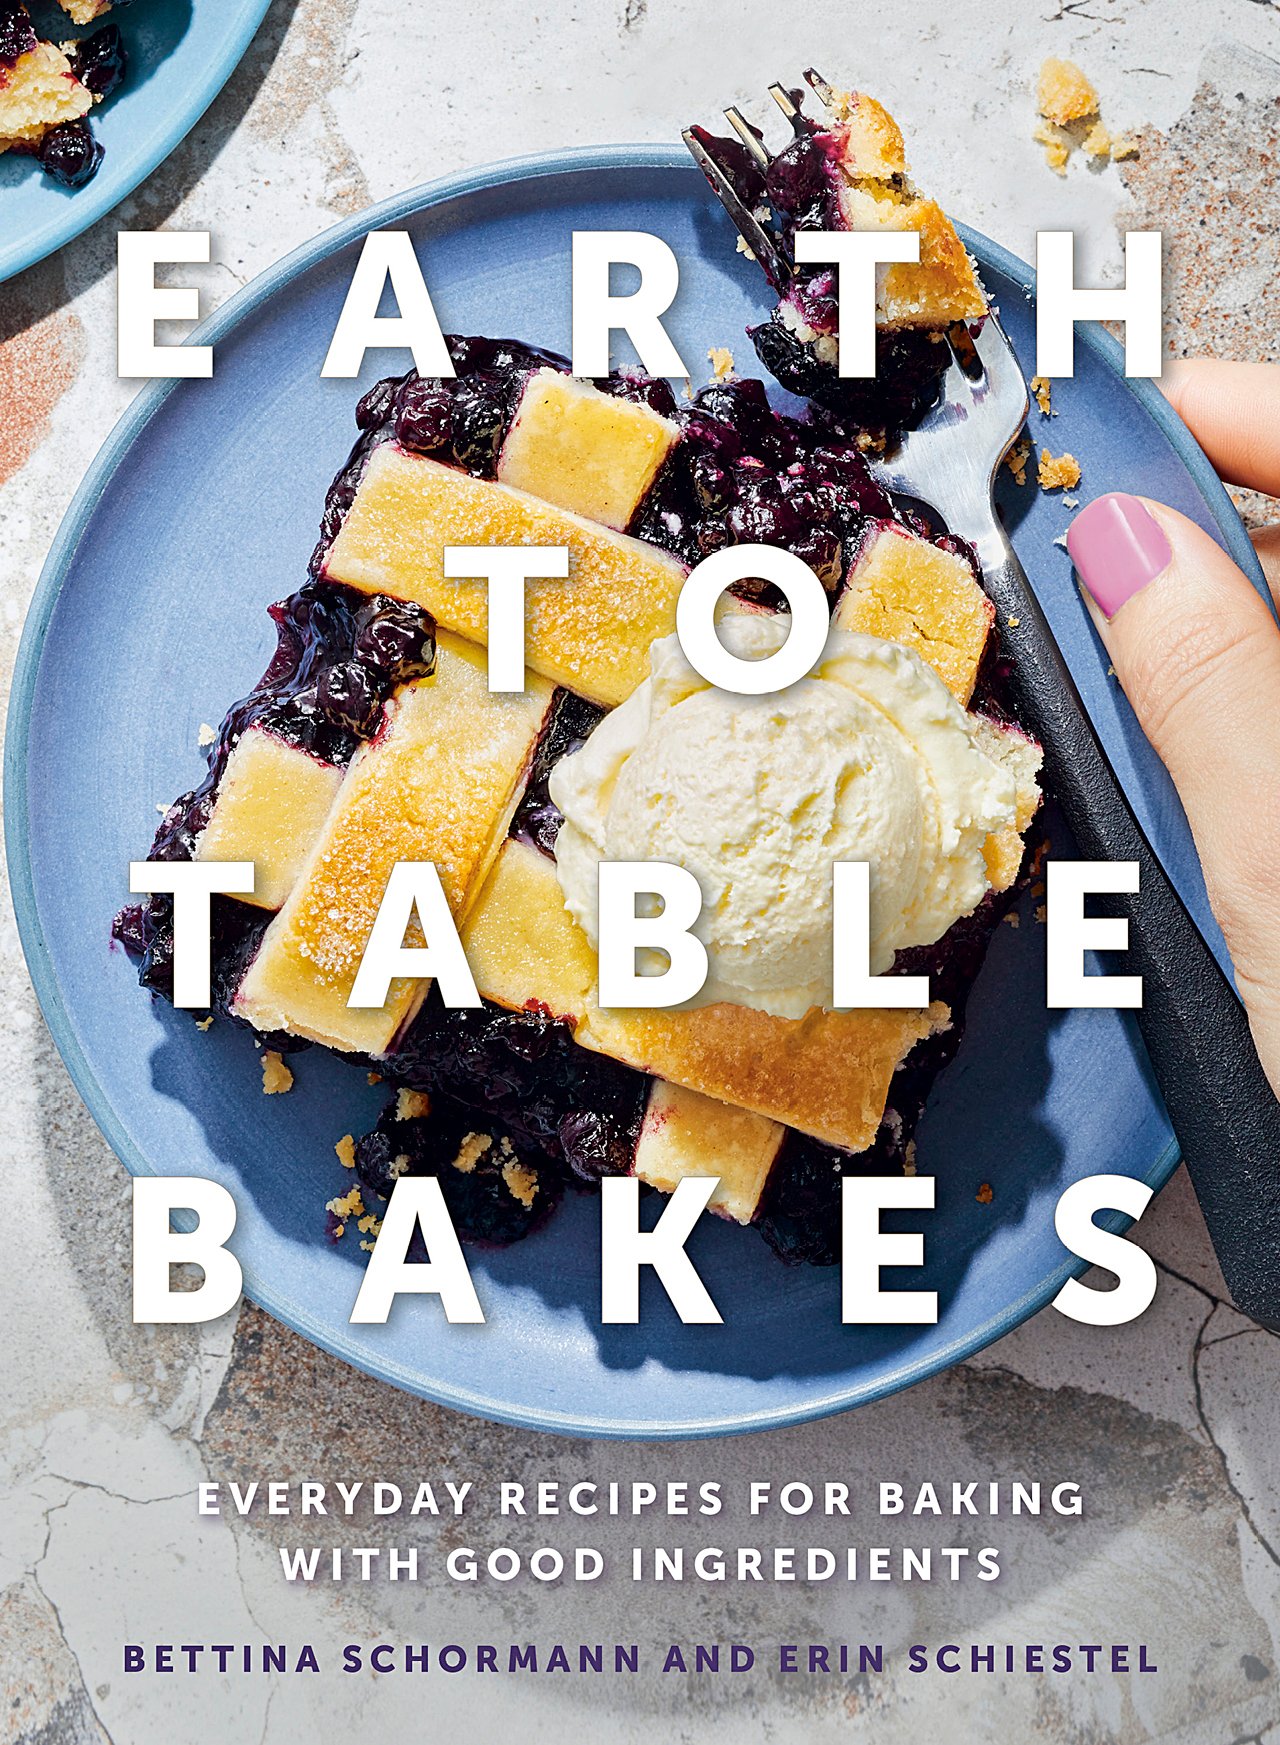 Earth to Table Bakes by Bettina Schormann and Erin Schiestel